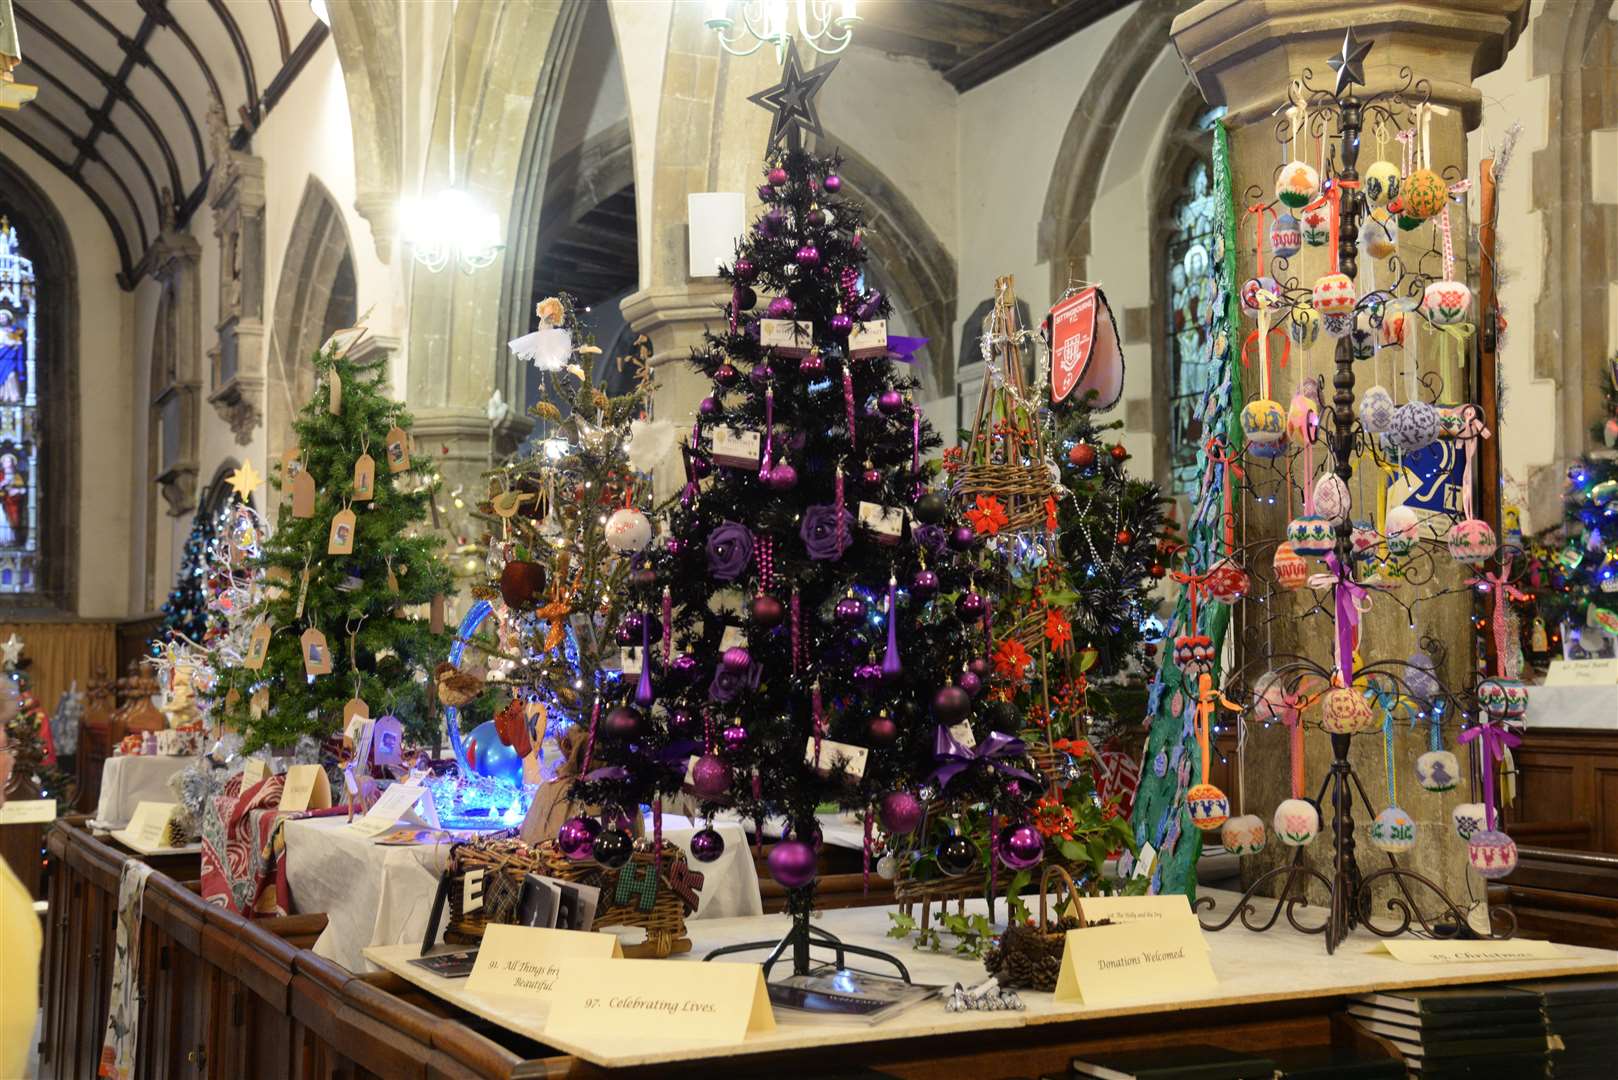 Just some of the 112 trees at the Christmas Tree Festival in 2017